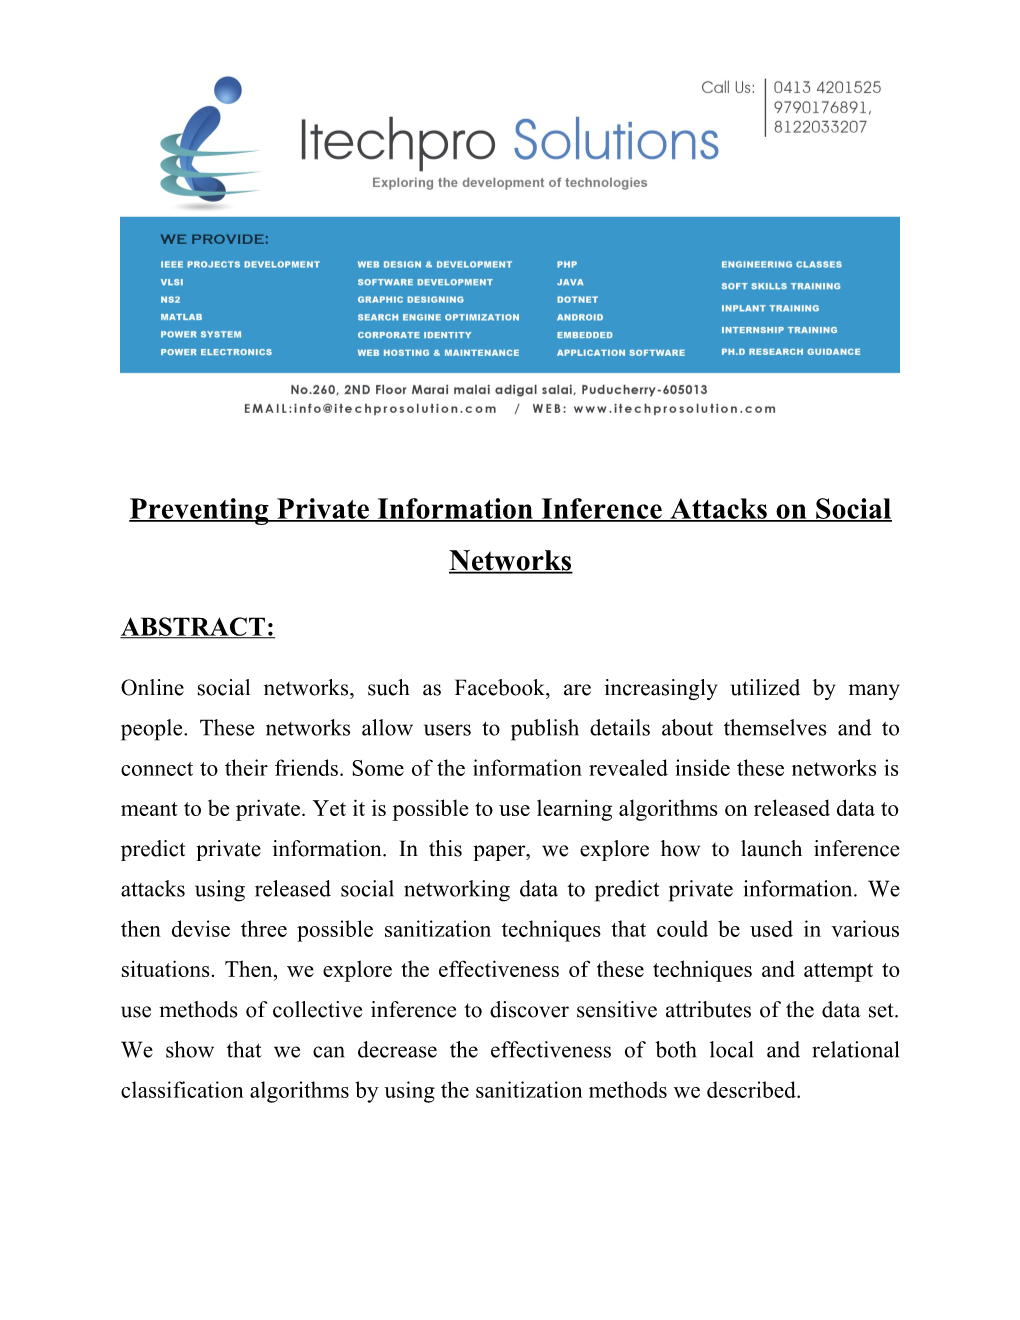 Preventing Private Information Inference Attacks on Social Networks